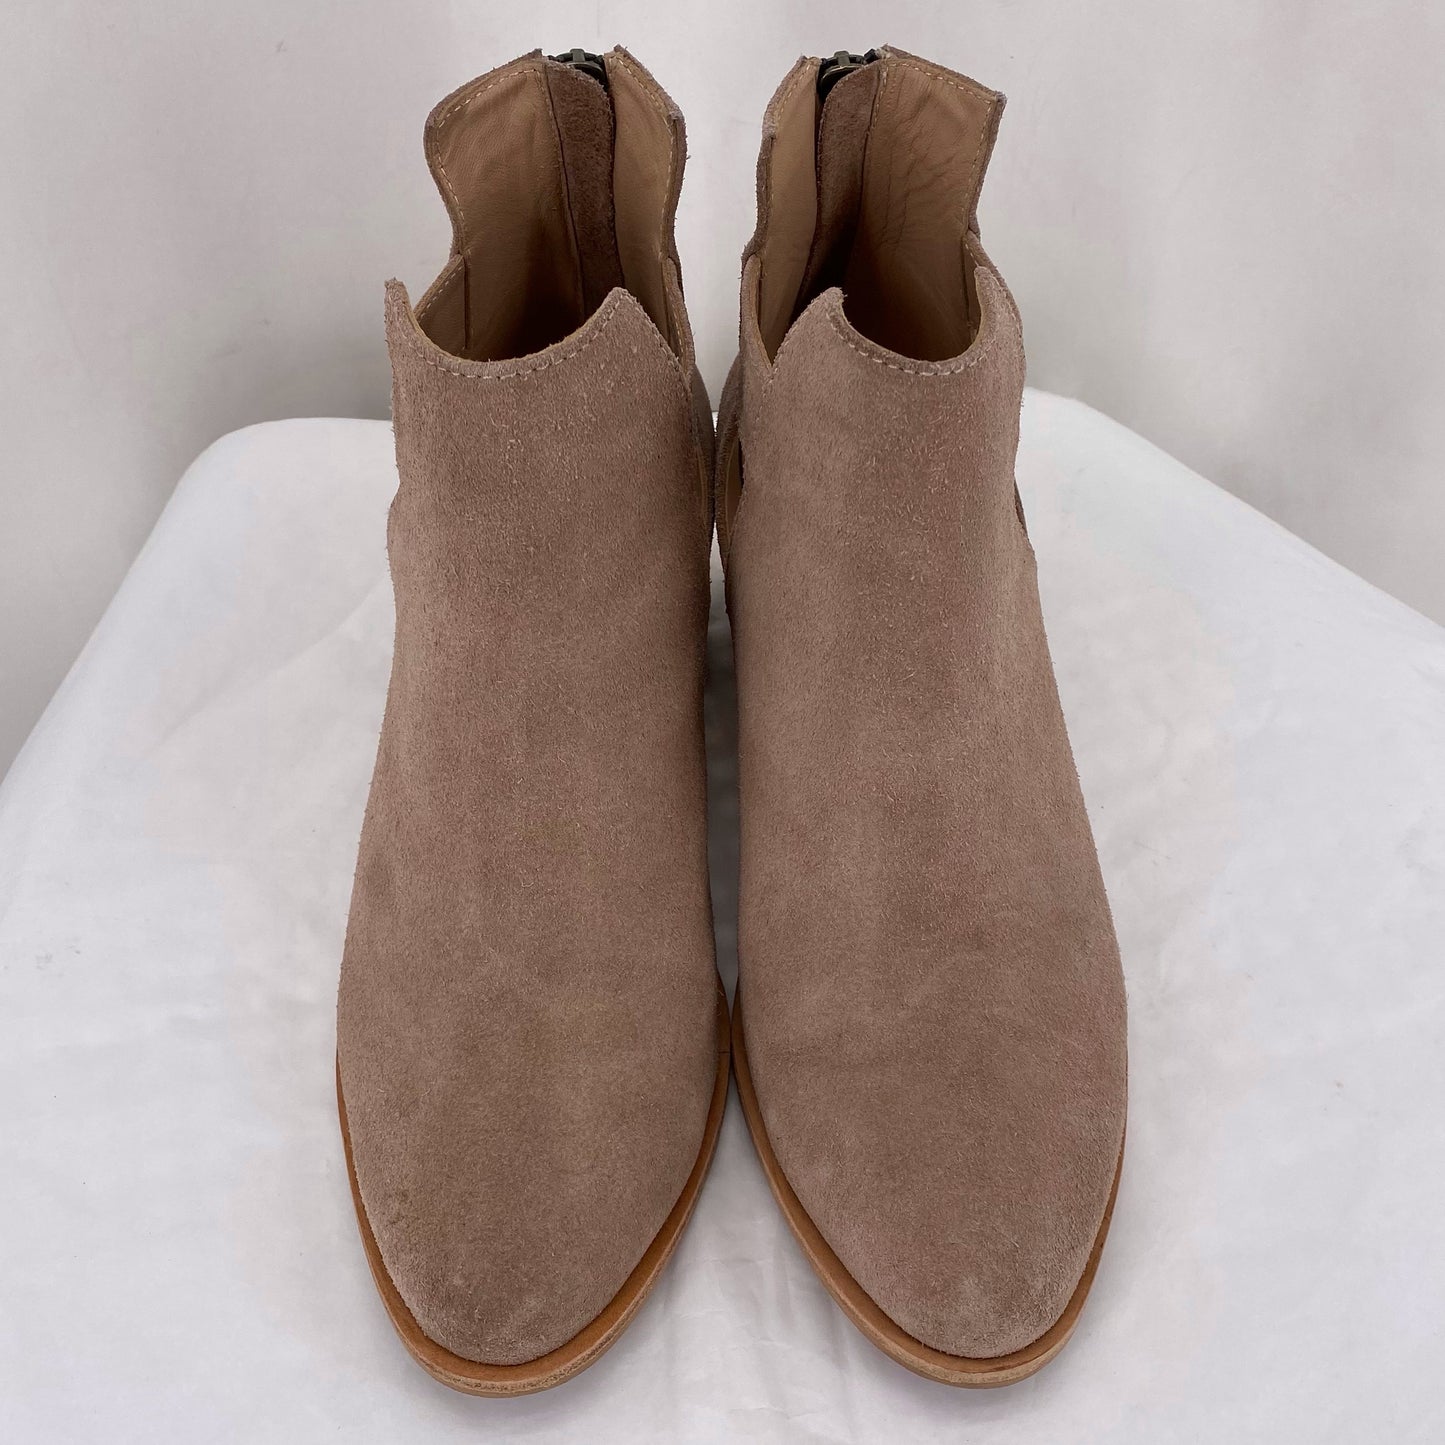 Tan W Shoe Size 8 ABLE shooties/booties